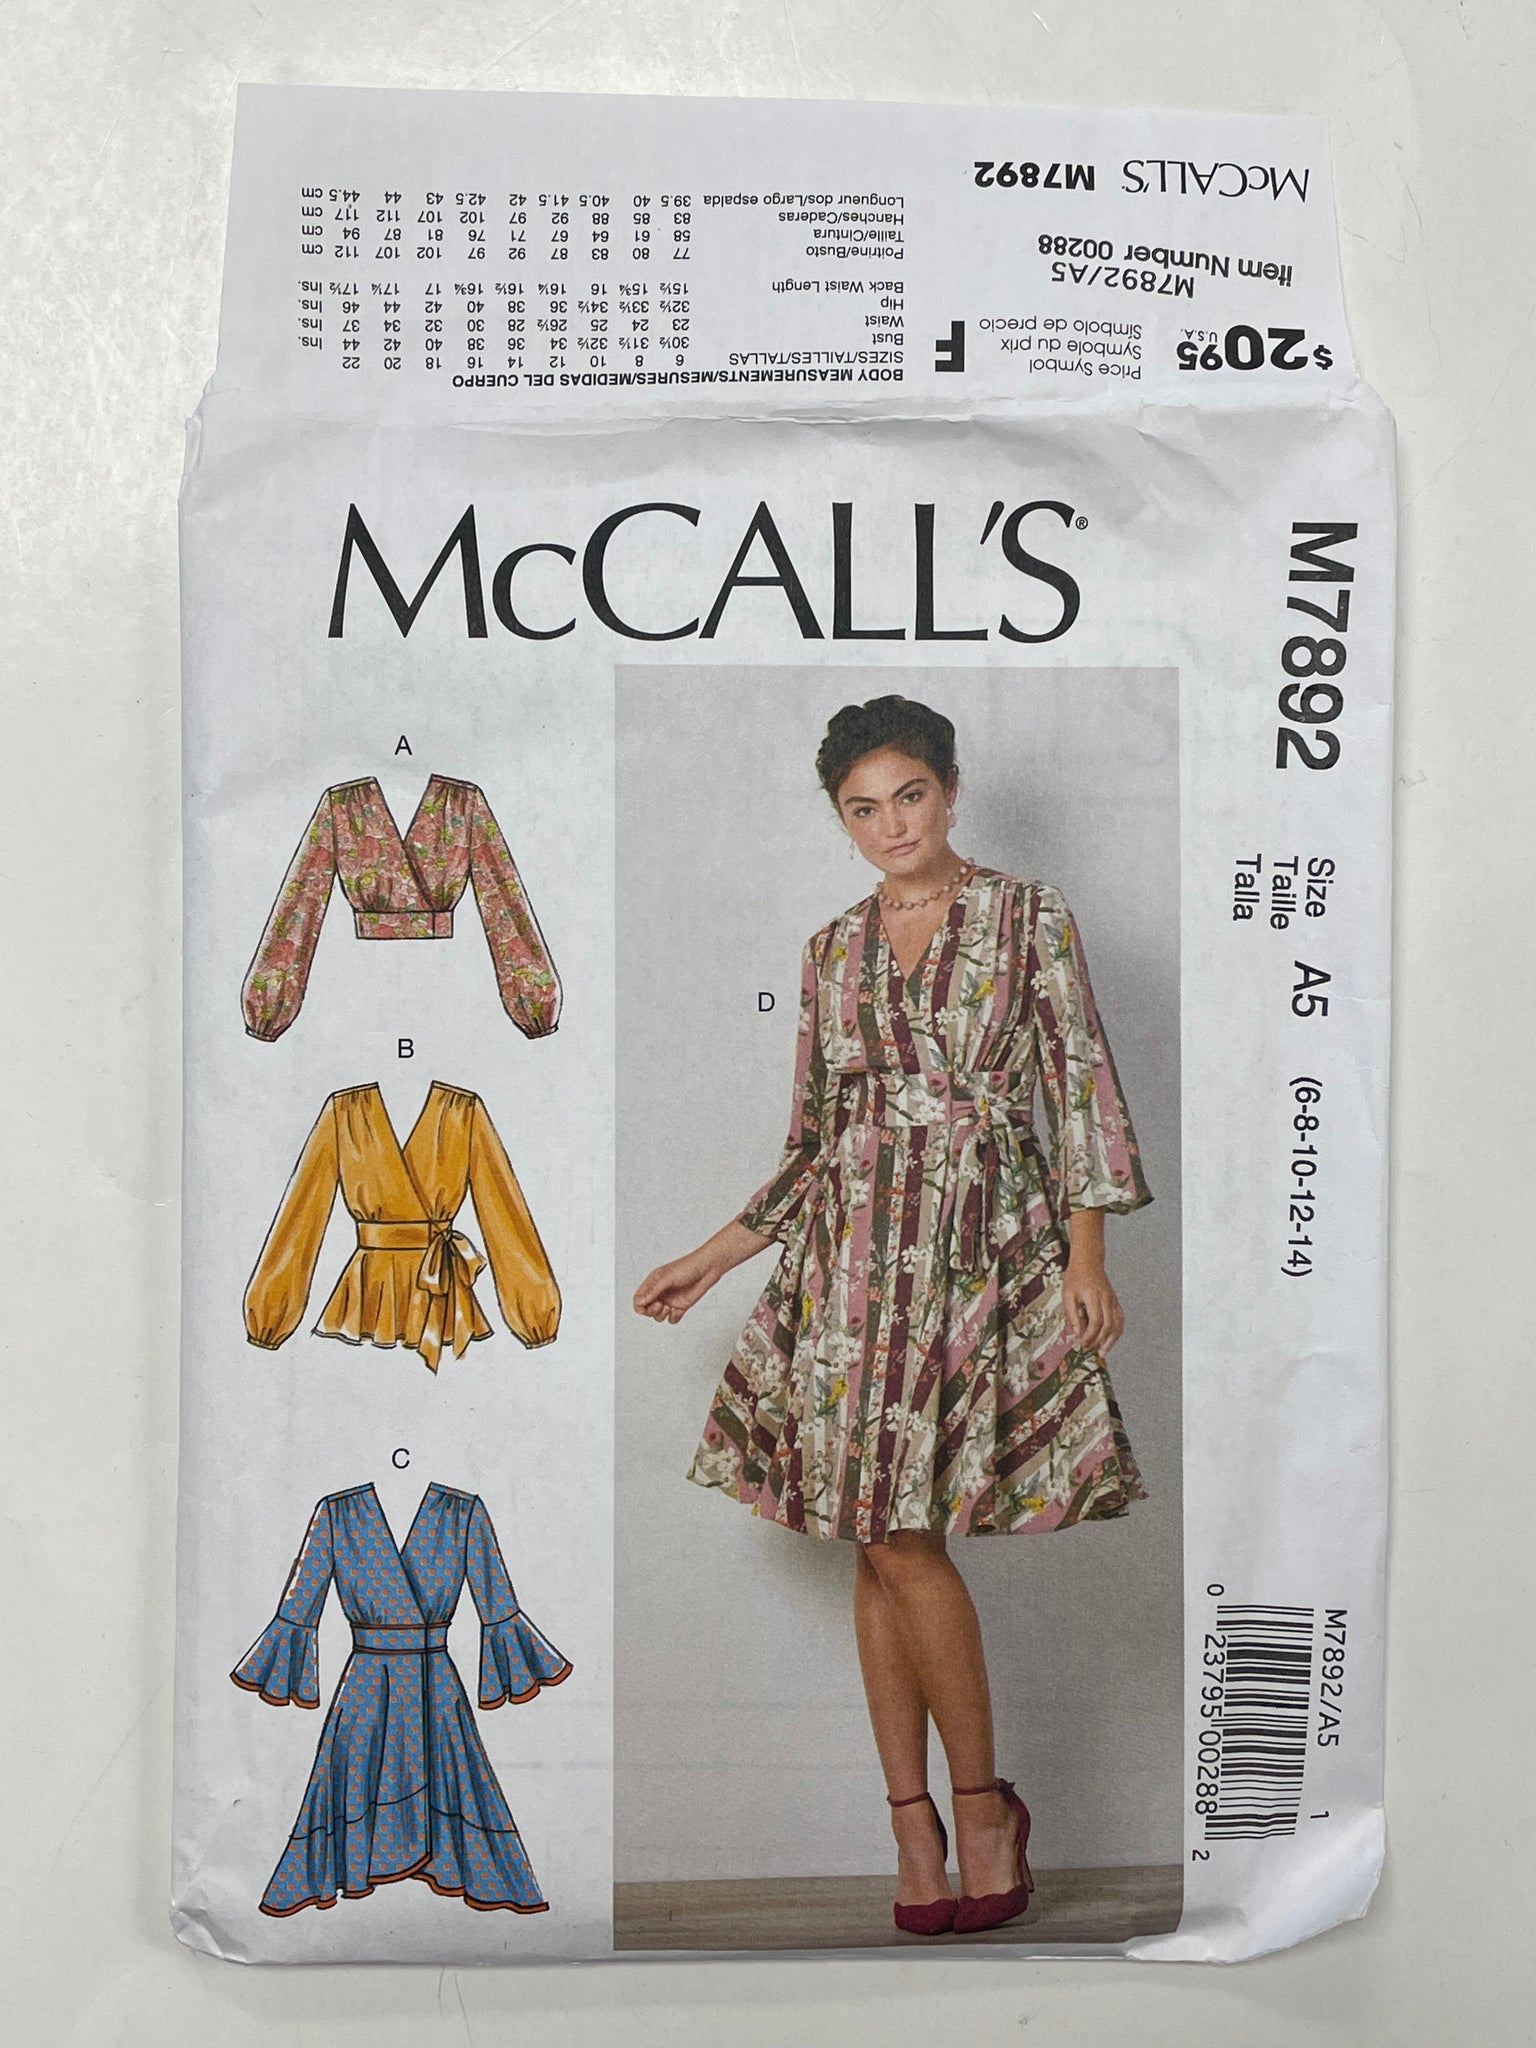 2019 McCall's 7892 Pattern - Wrap Dress and Tops FACTORY FOLDED